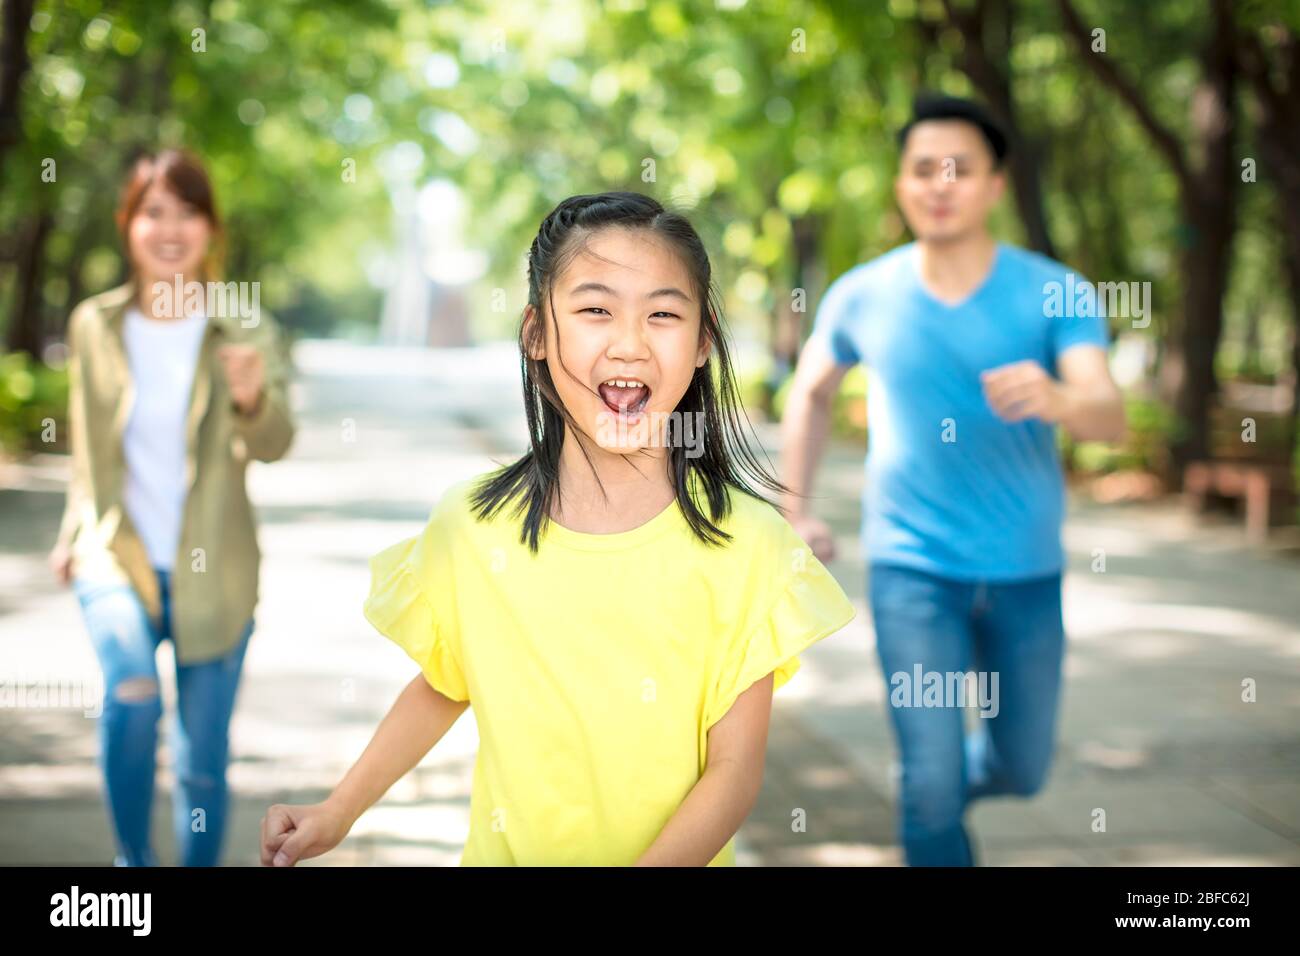 Young asian family with child having fun in nature park Stock Photo